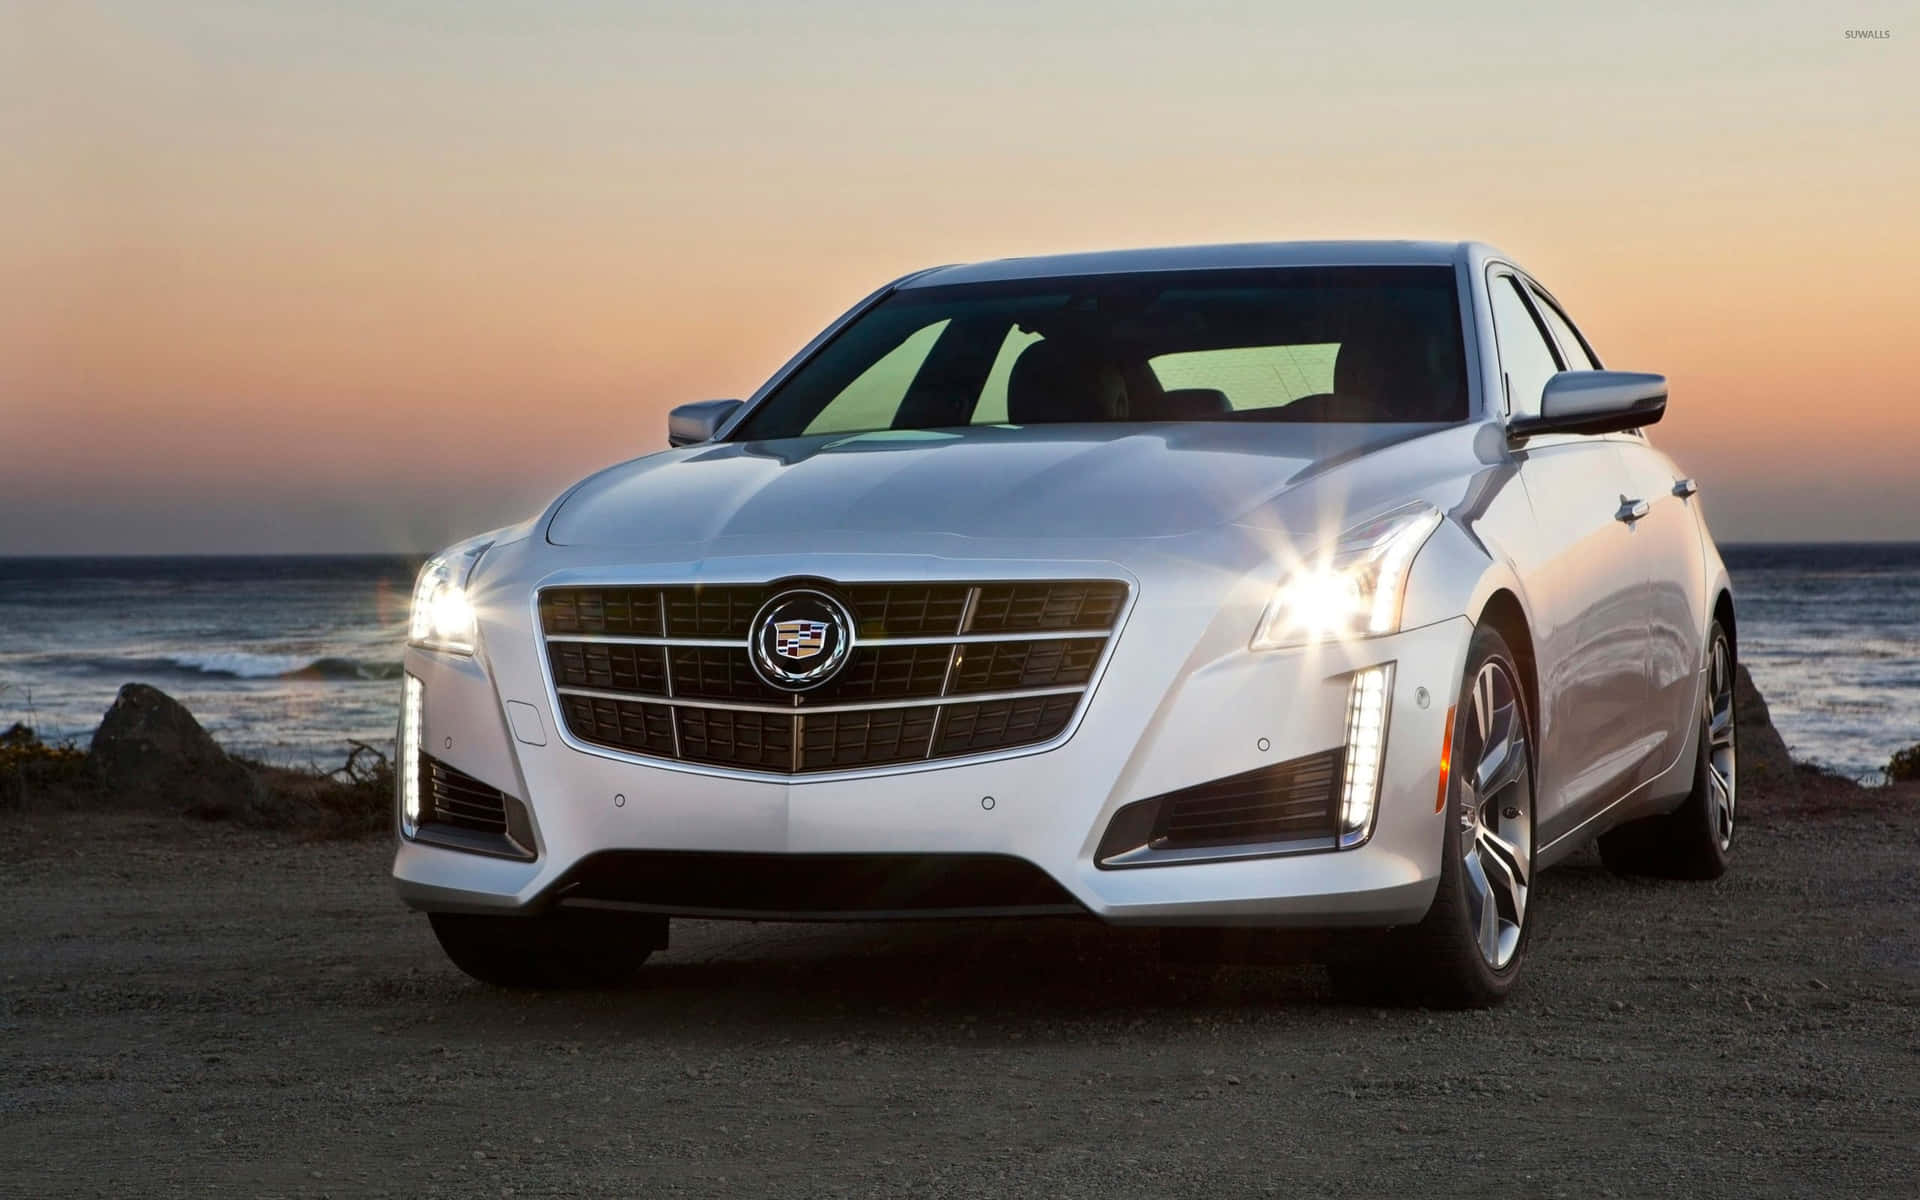 Sleek and Stylish Cadillac CTS in Action Wallpaper